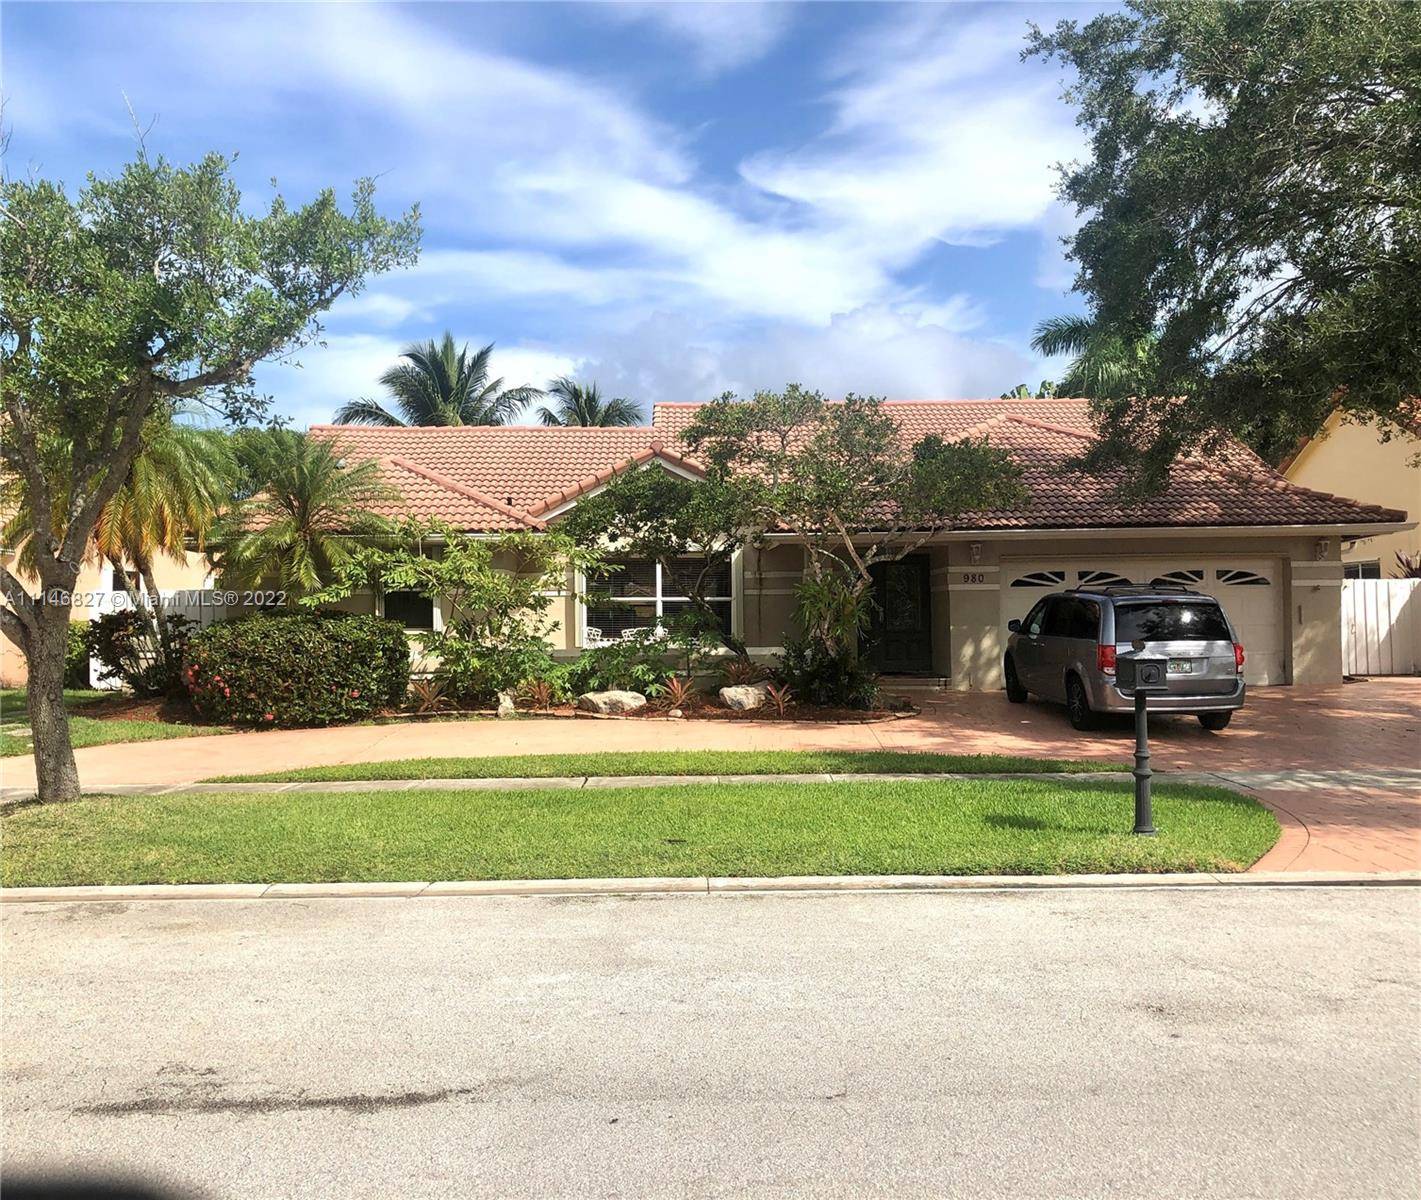 This is a great home for entertaining, large extended covered patio, great paved pool deck and an amazing lake view, this is the Saphire model, large split bedroom floor plan ...